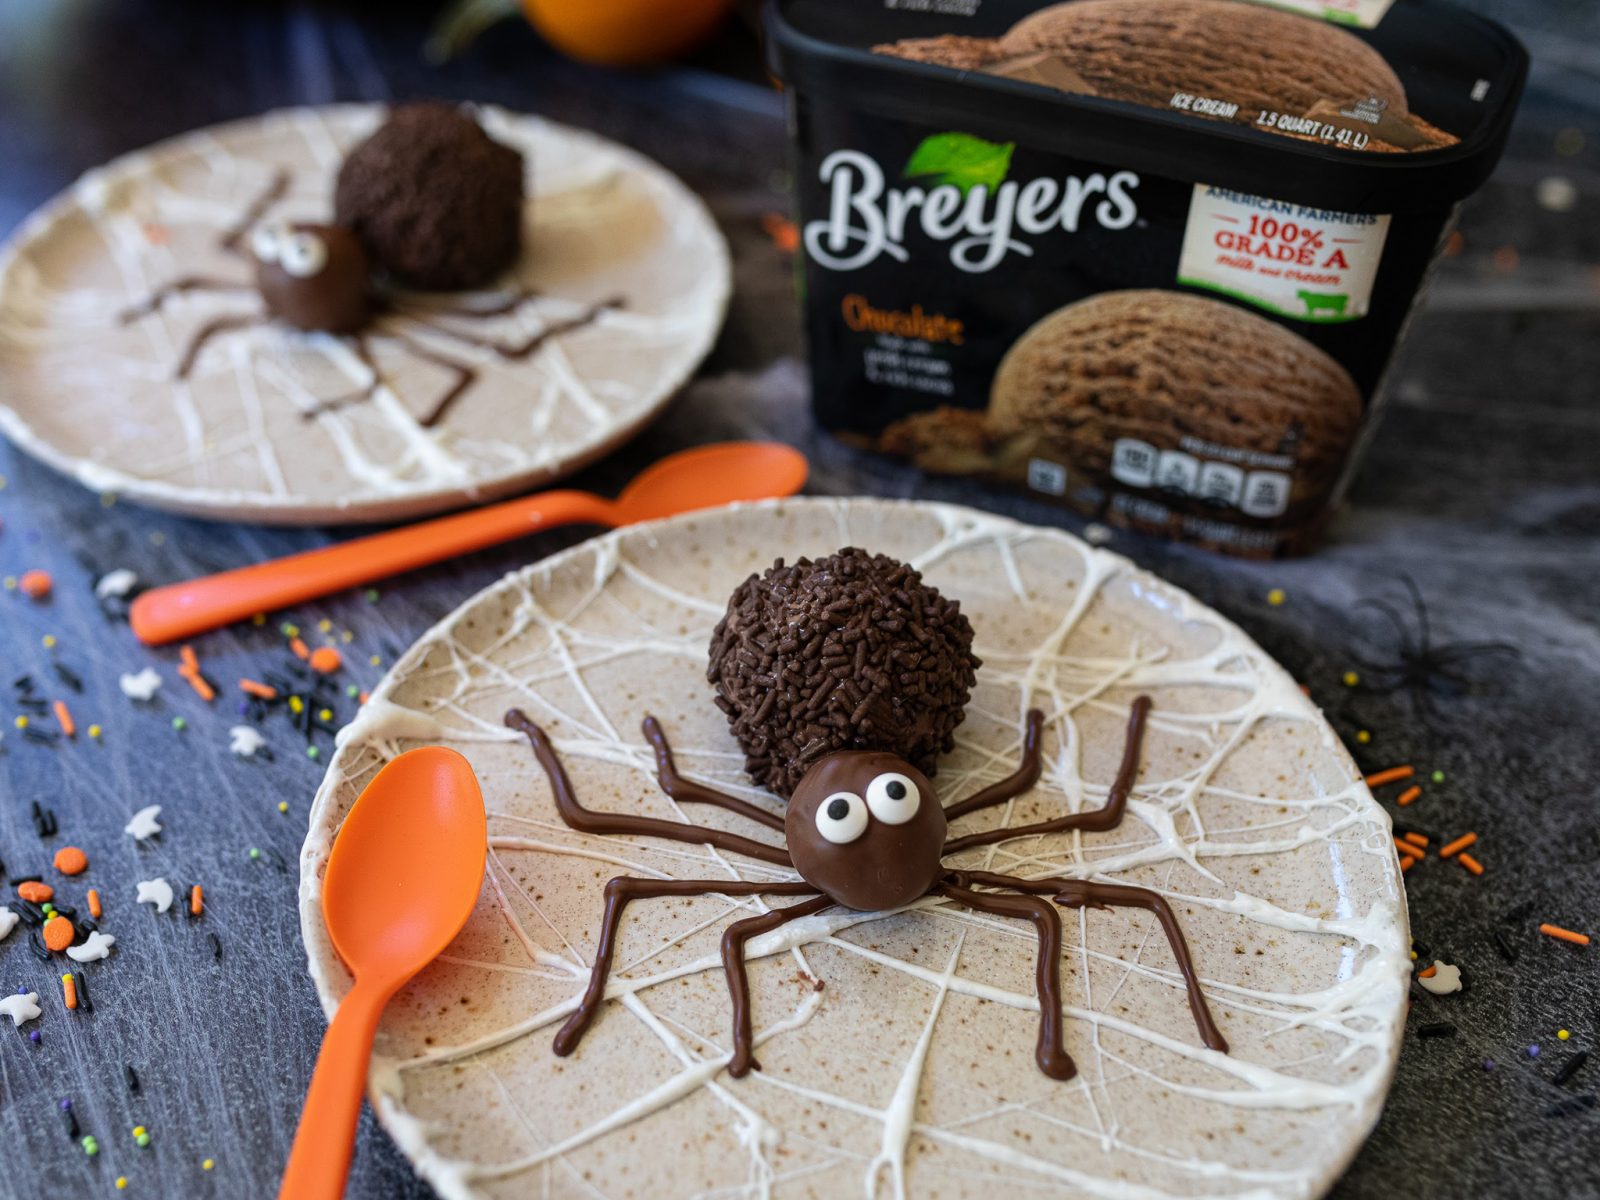 Add Some Fun To Mealtime With My Breyers® Spider Brownie Sundaes – Save Now At Publix